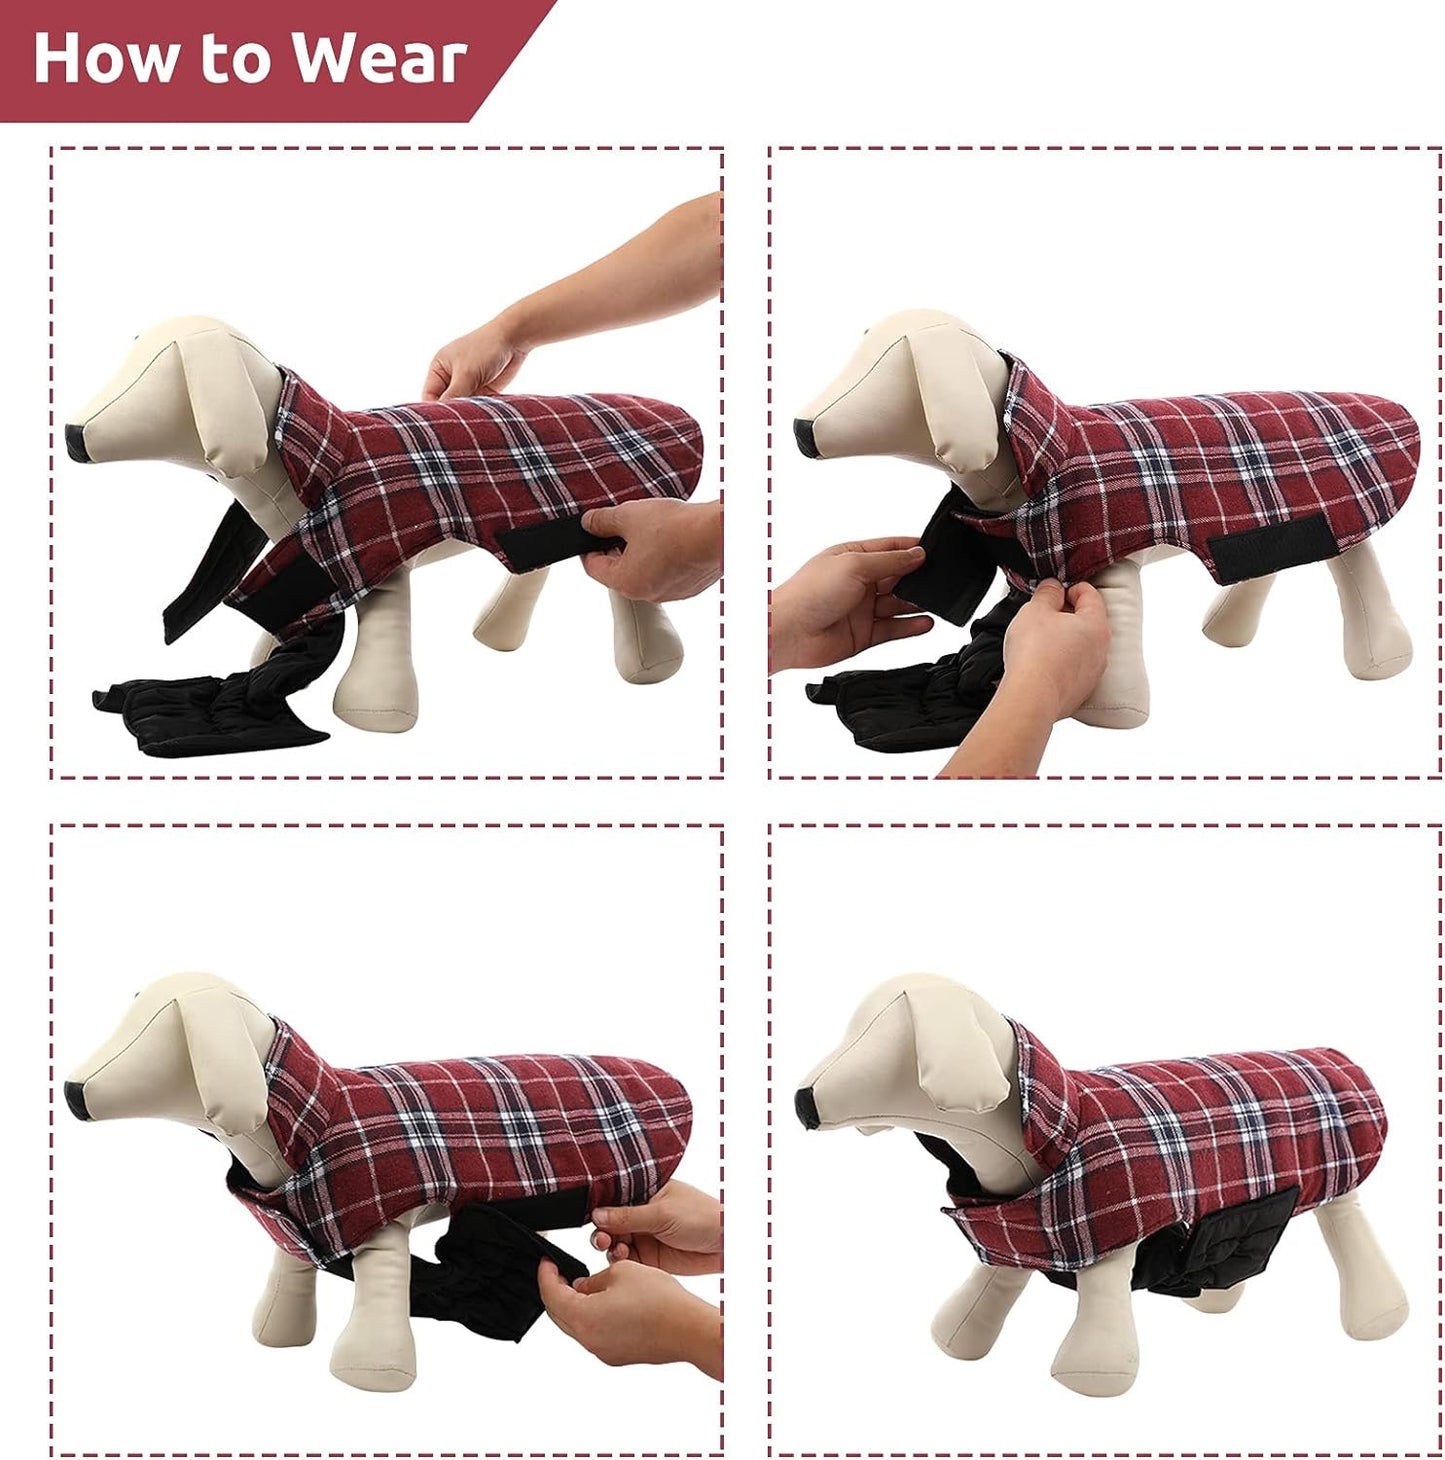 Dog Jackets for Winter, Reversible Dog Coat Windproof Waterproof Dog Winter Jackets for Cold Weather, British Style Plaid Dog Coats Warm Dog Vest for Small Medium Large Dogs,Red